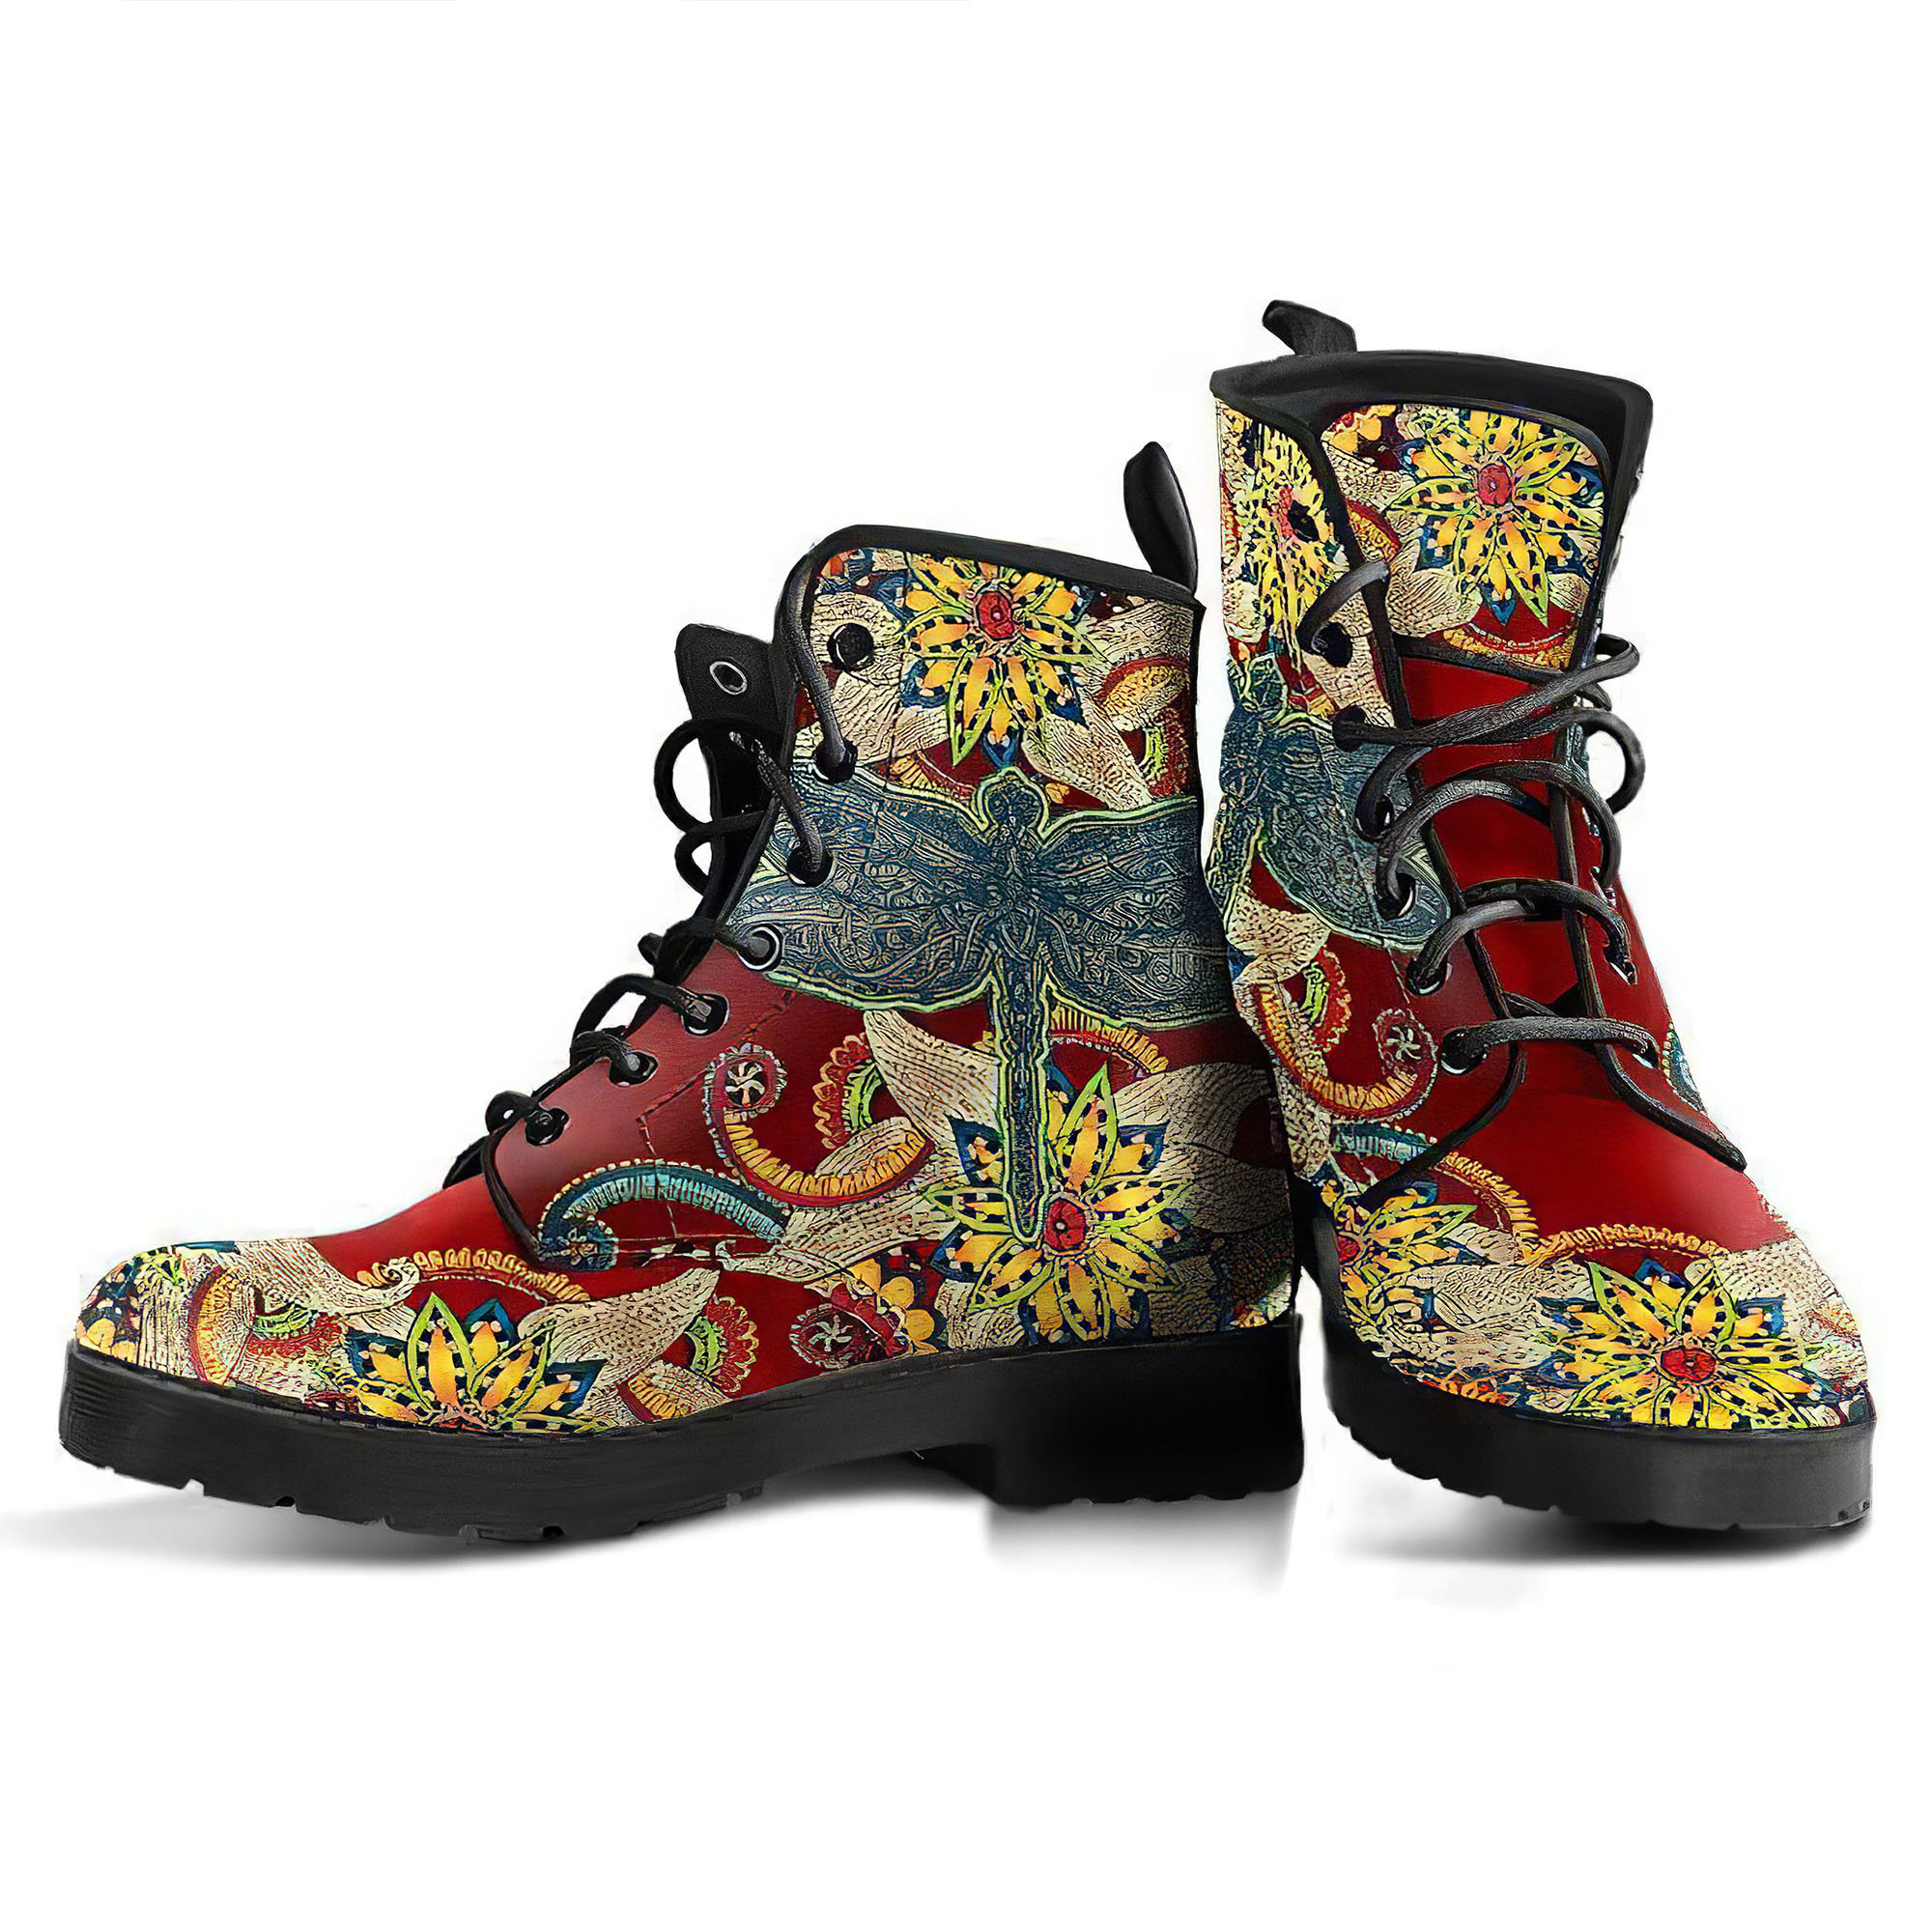 handcrafted-dragonfly-mandala-red-boots-gp-main.jpg